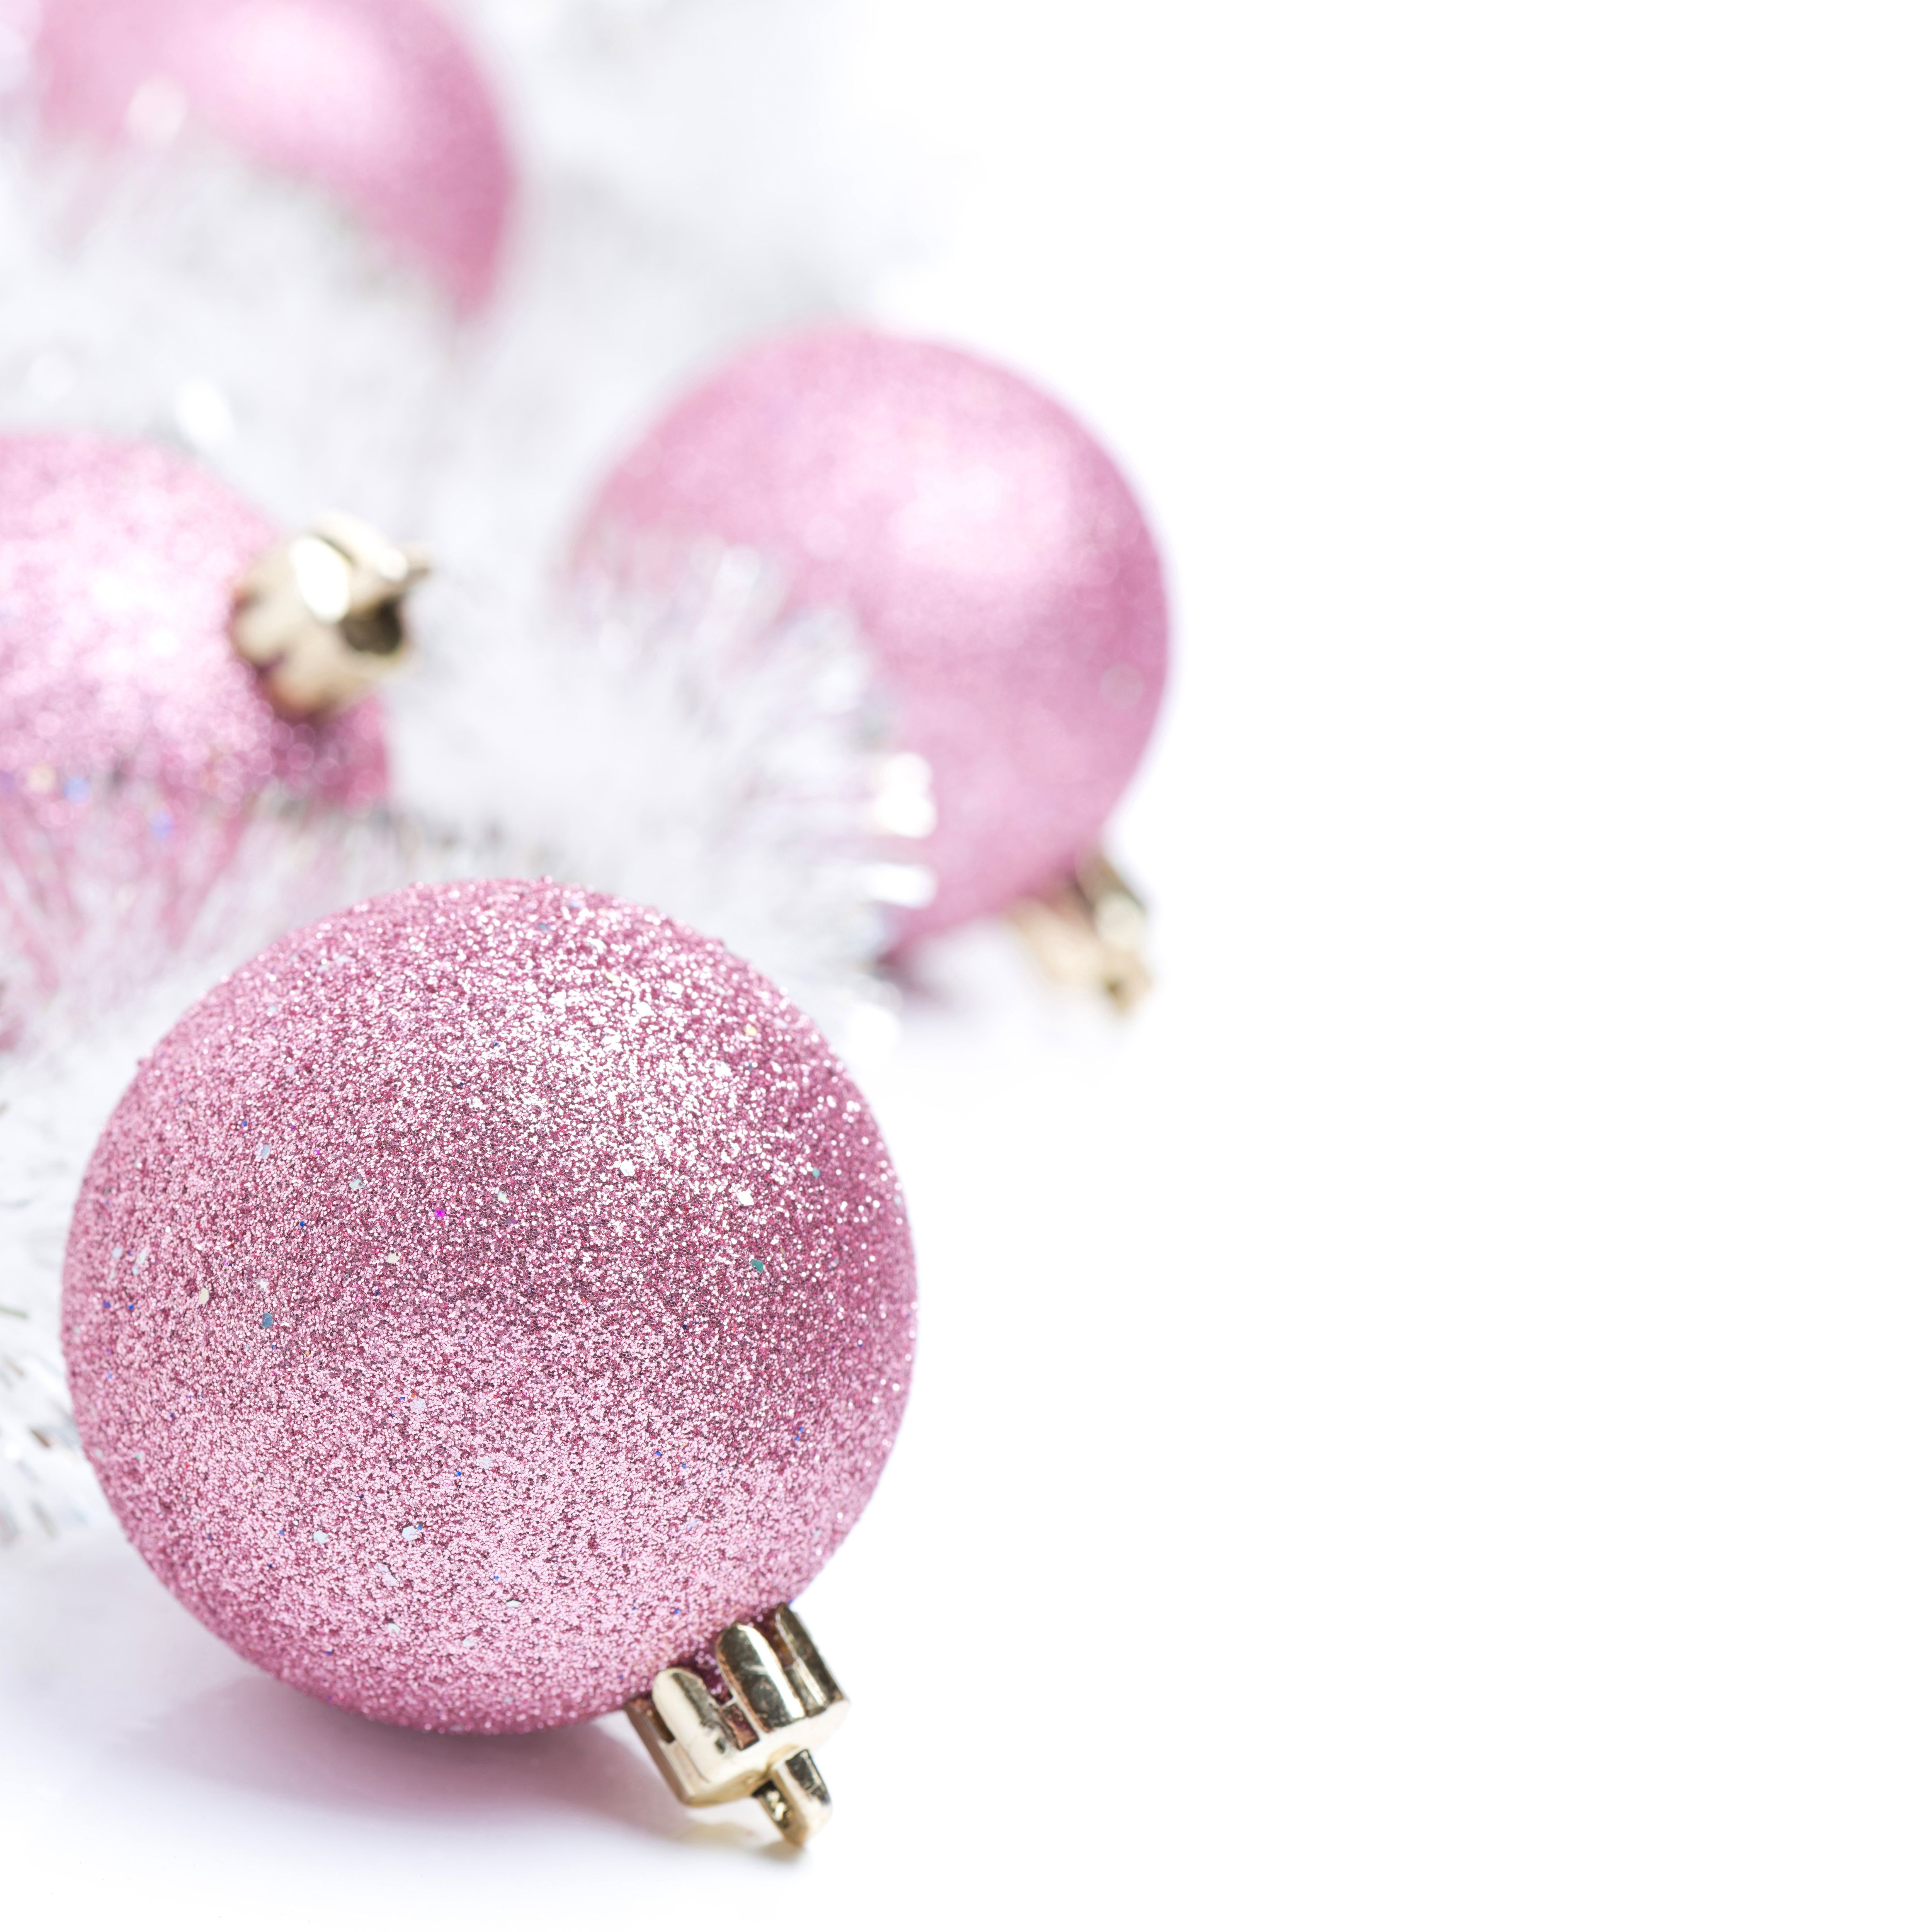 Pink Christmas Background Png & Free Pink Christmas Background.png Transparent Image